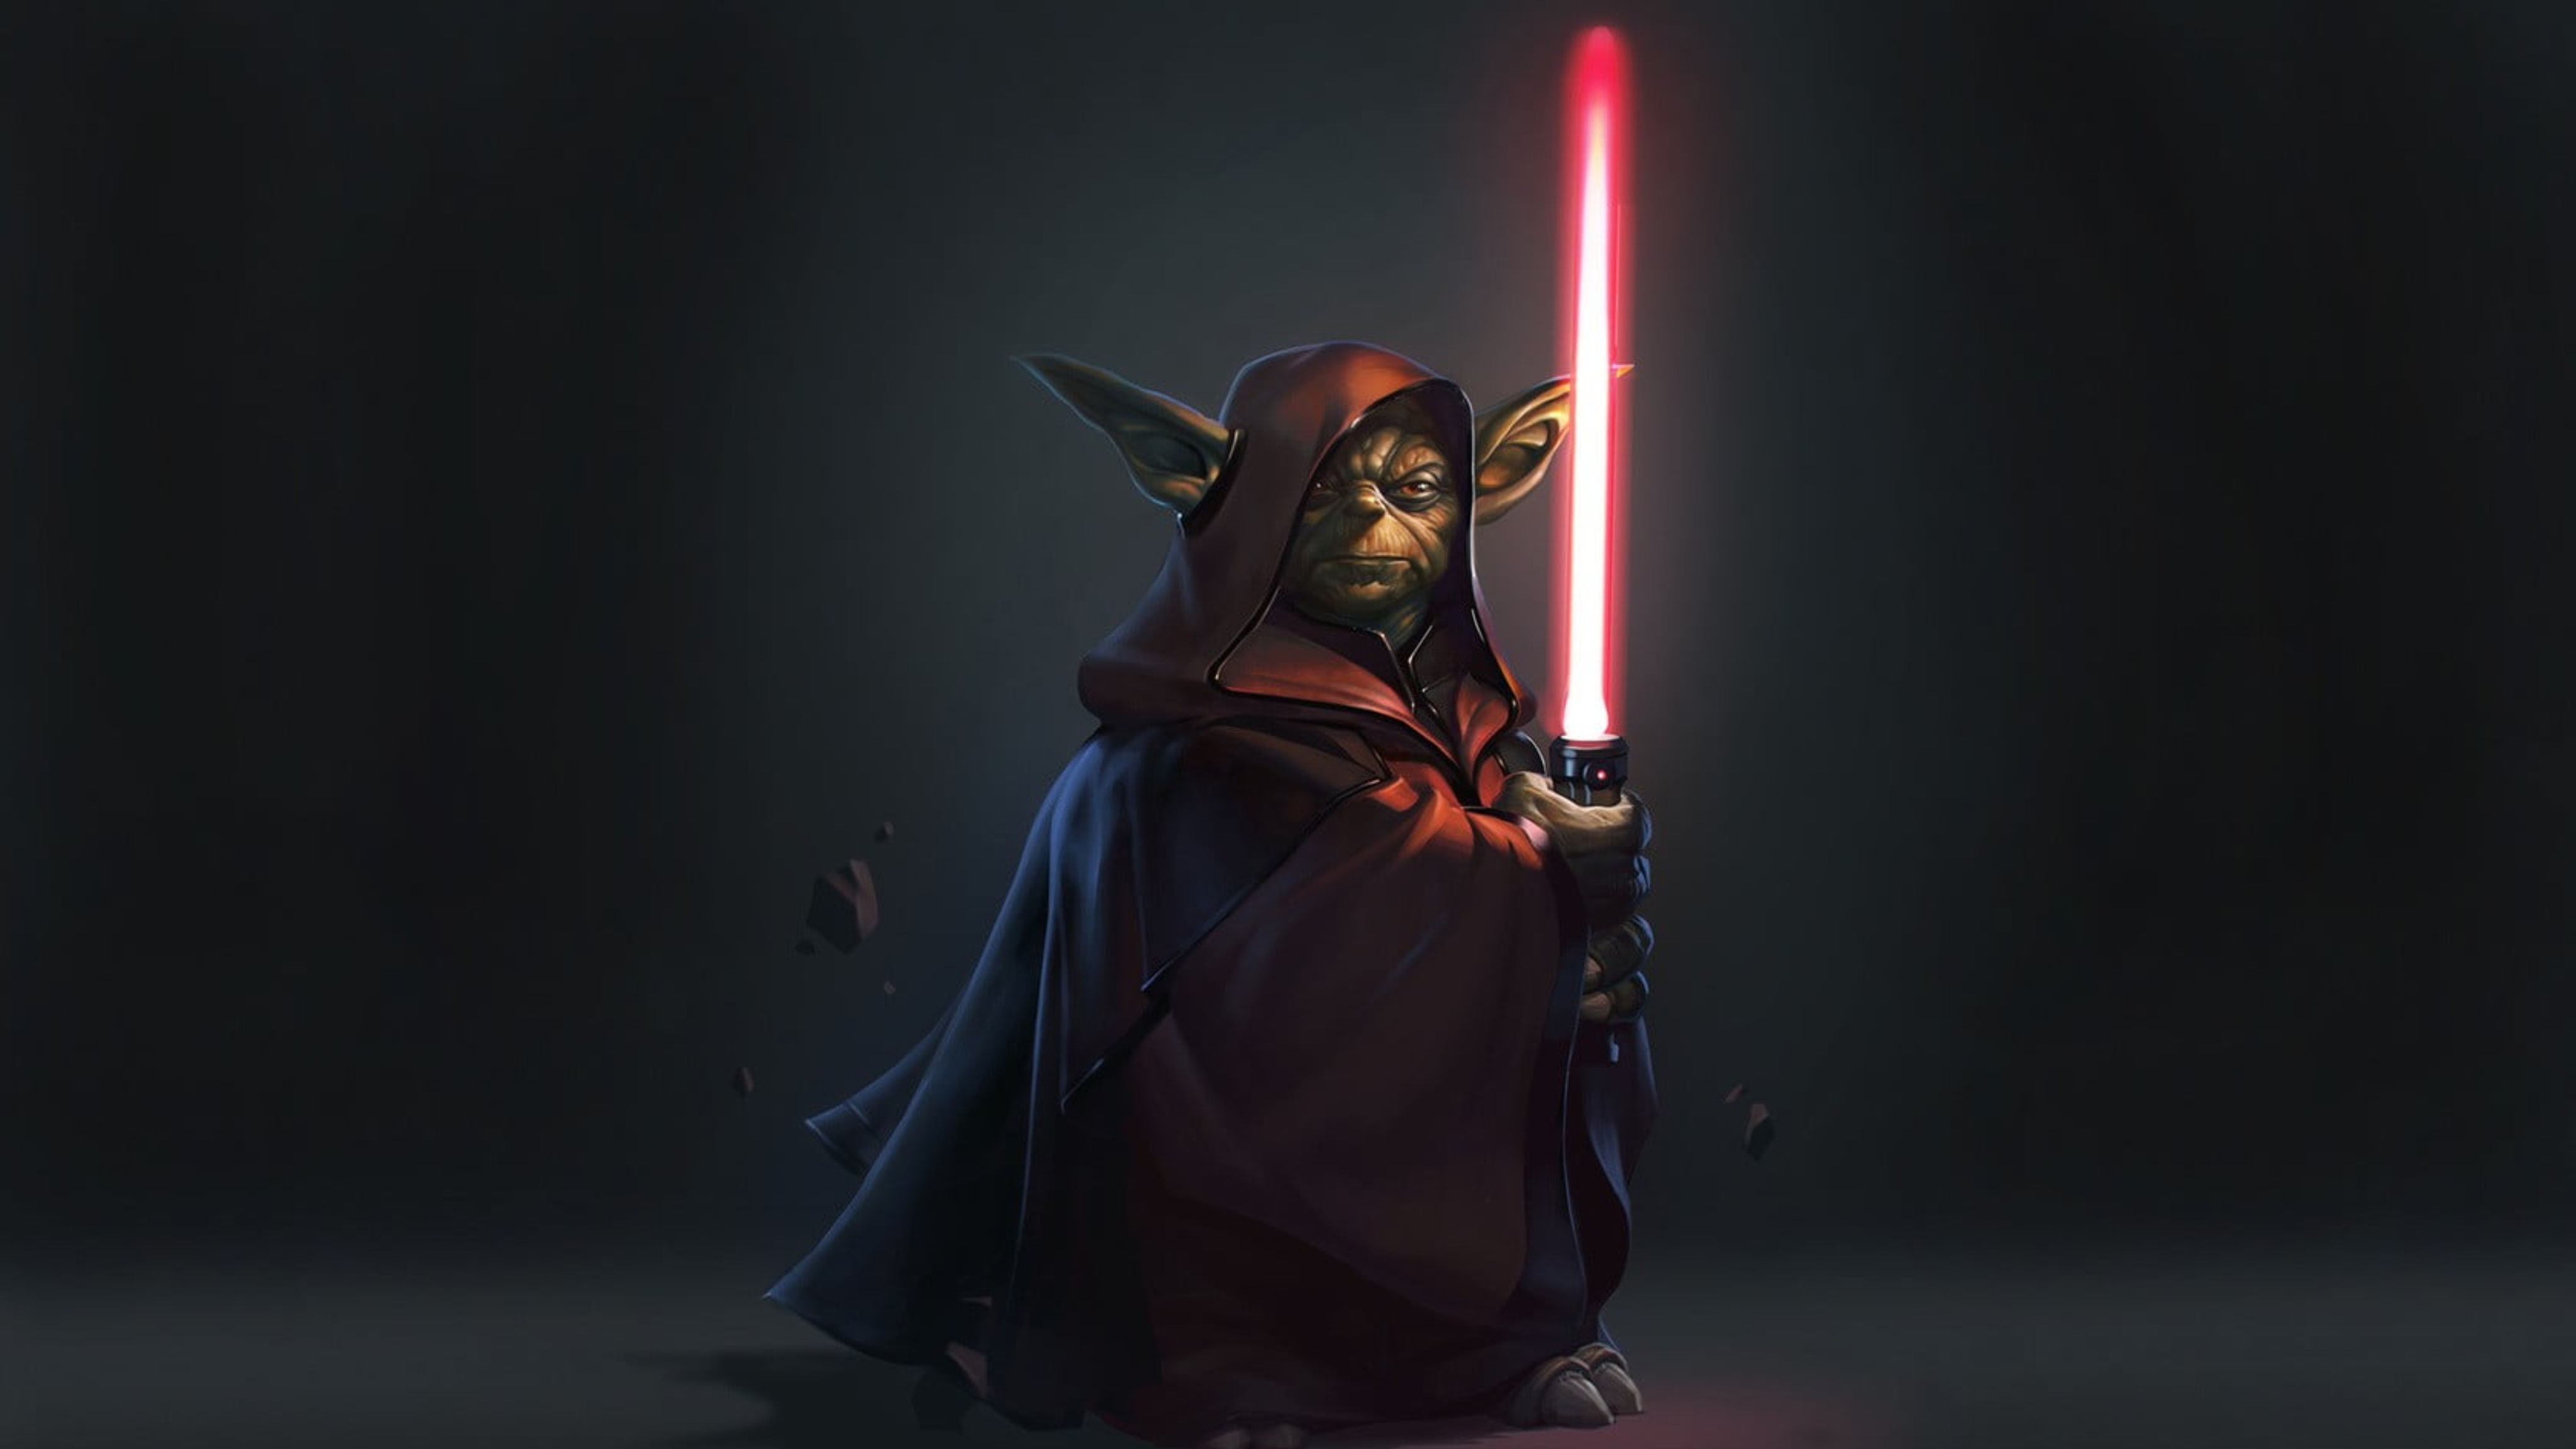 Yoda 4K wallpaper for your desktop or mobile screen free and easy to download